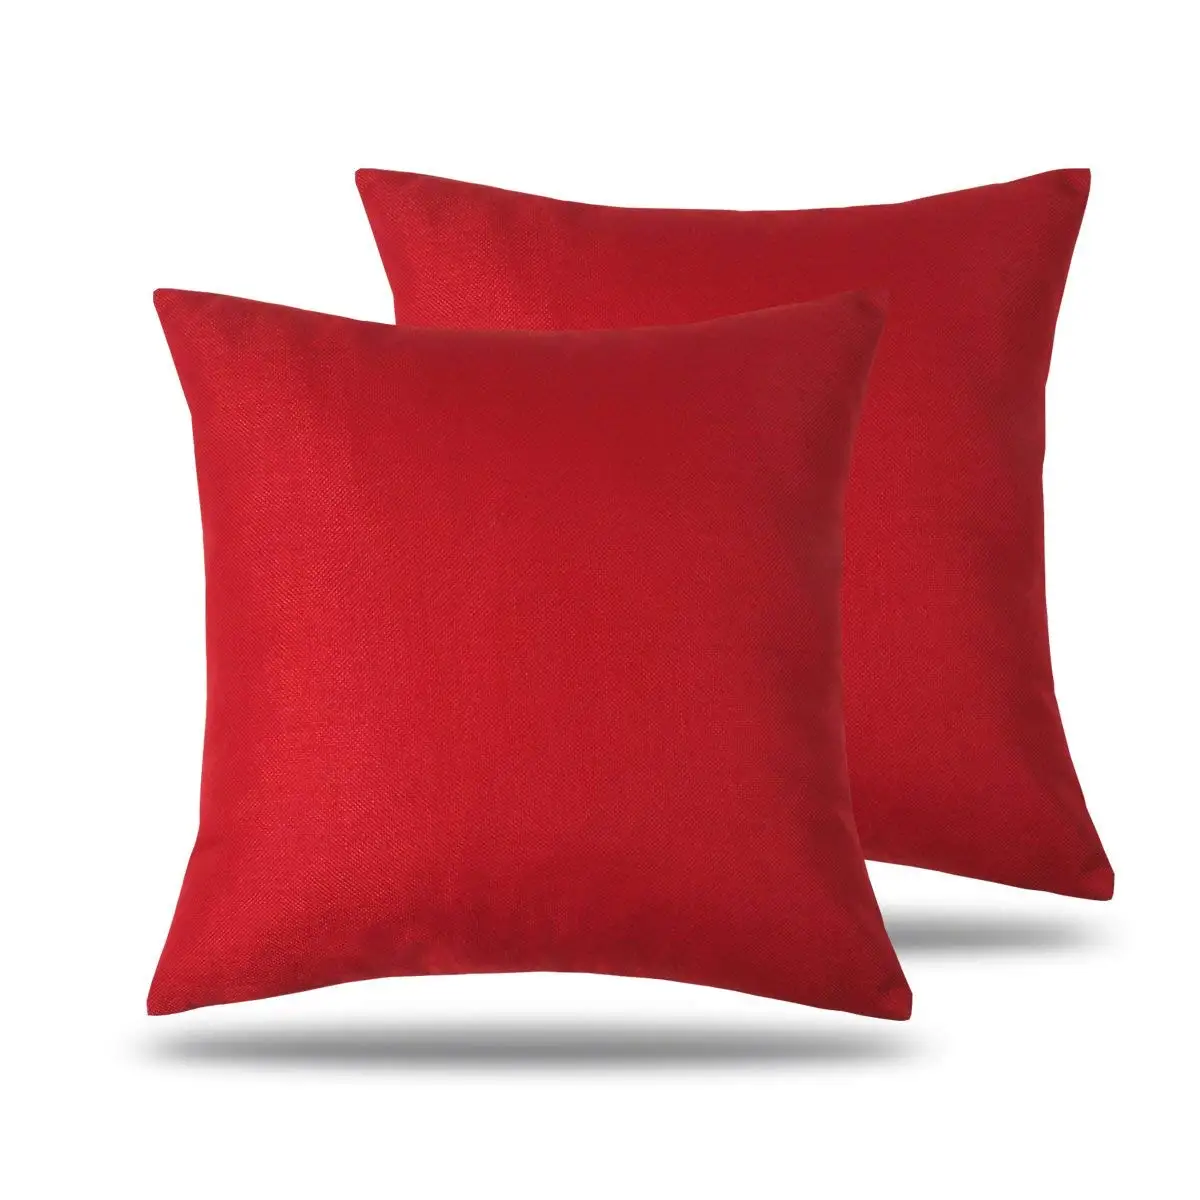 Cheap Red Pillow Covers 18 X 18, find 